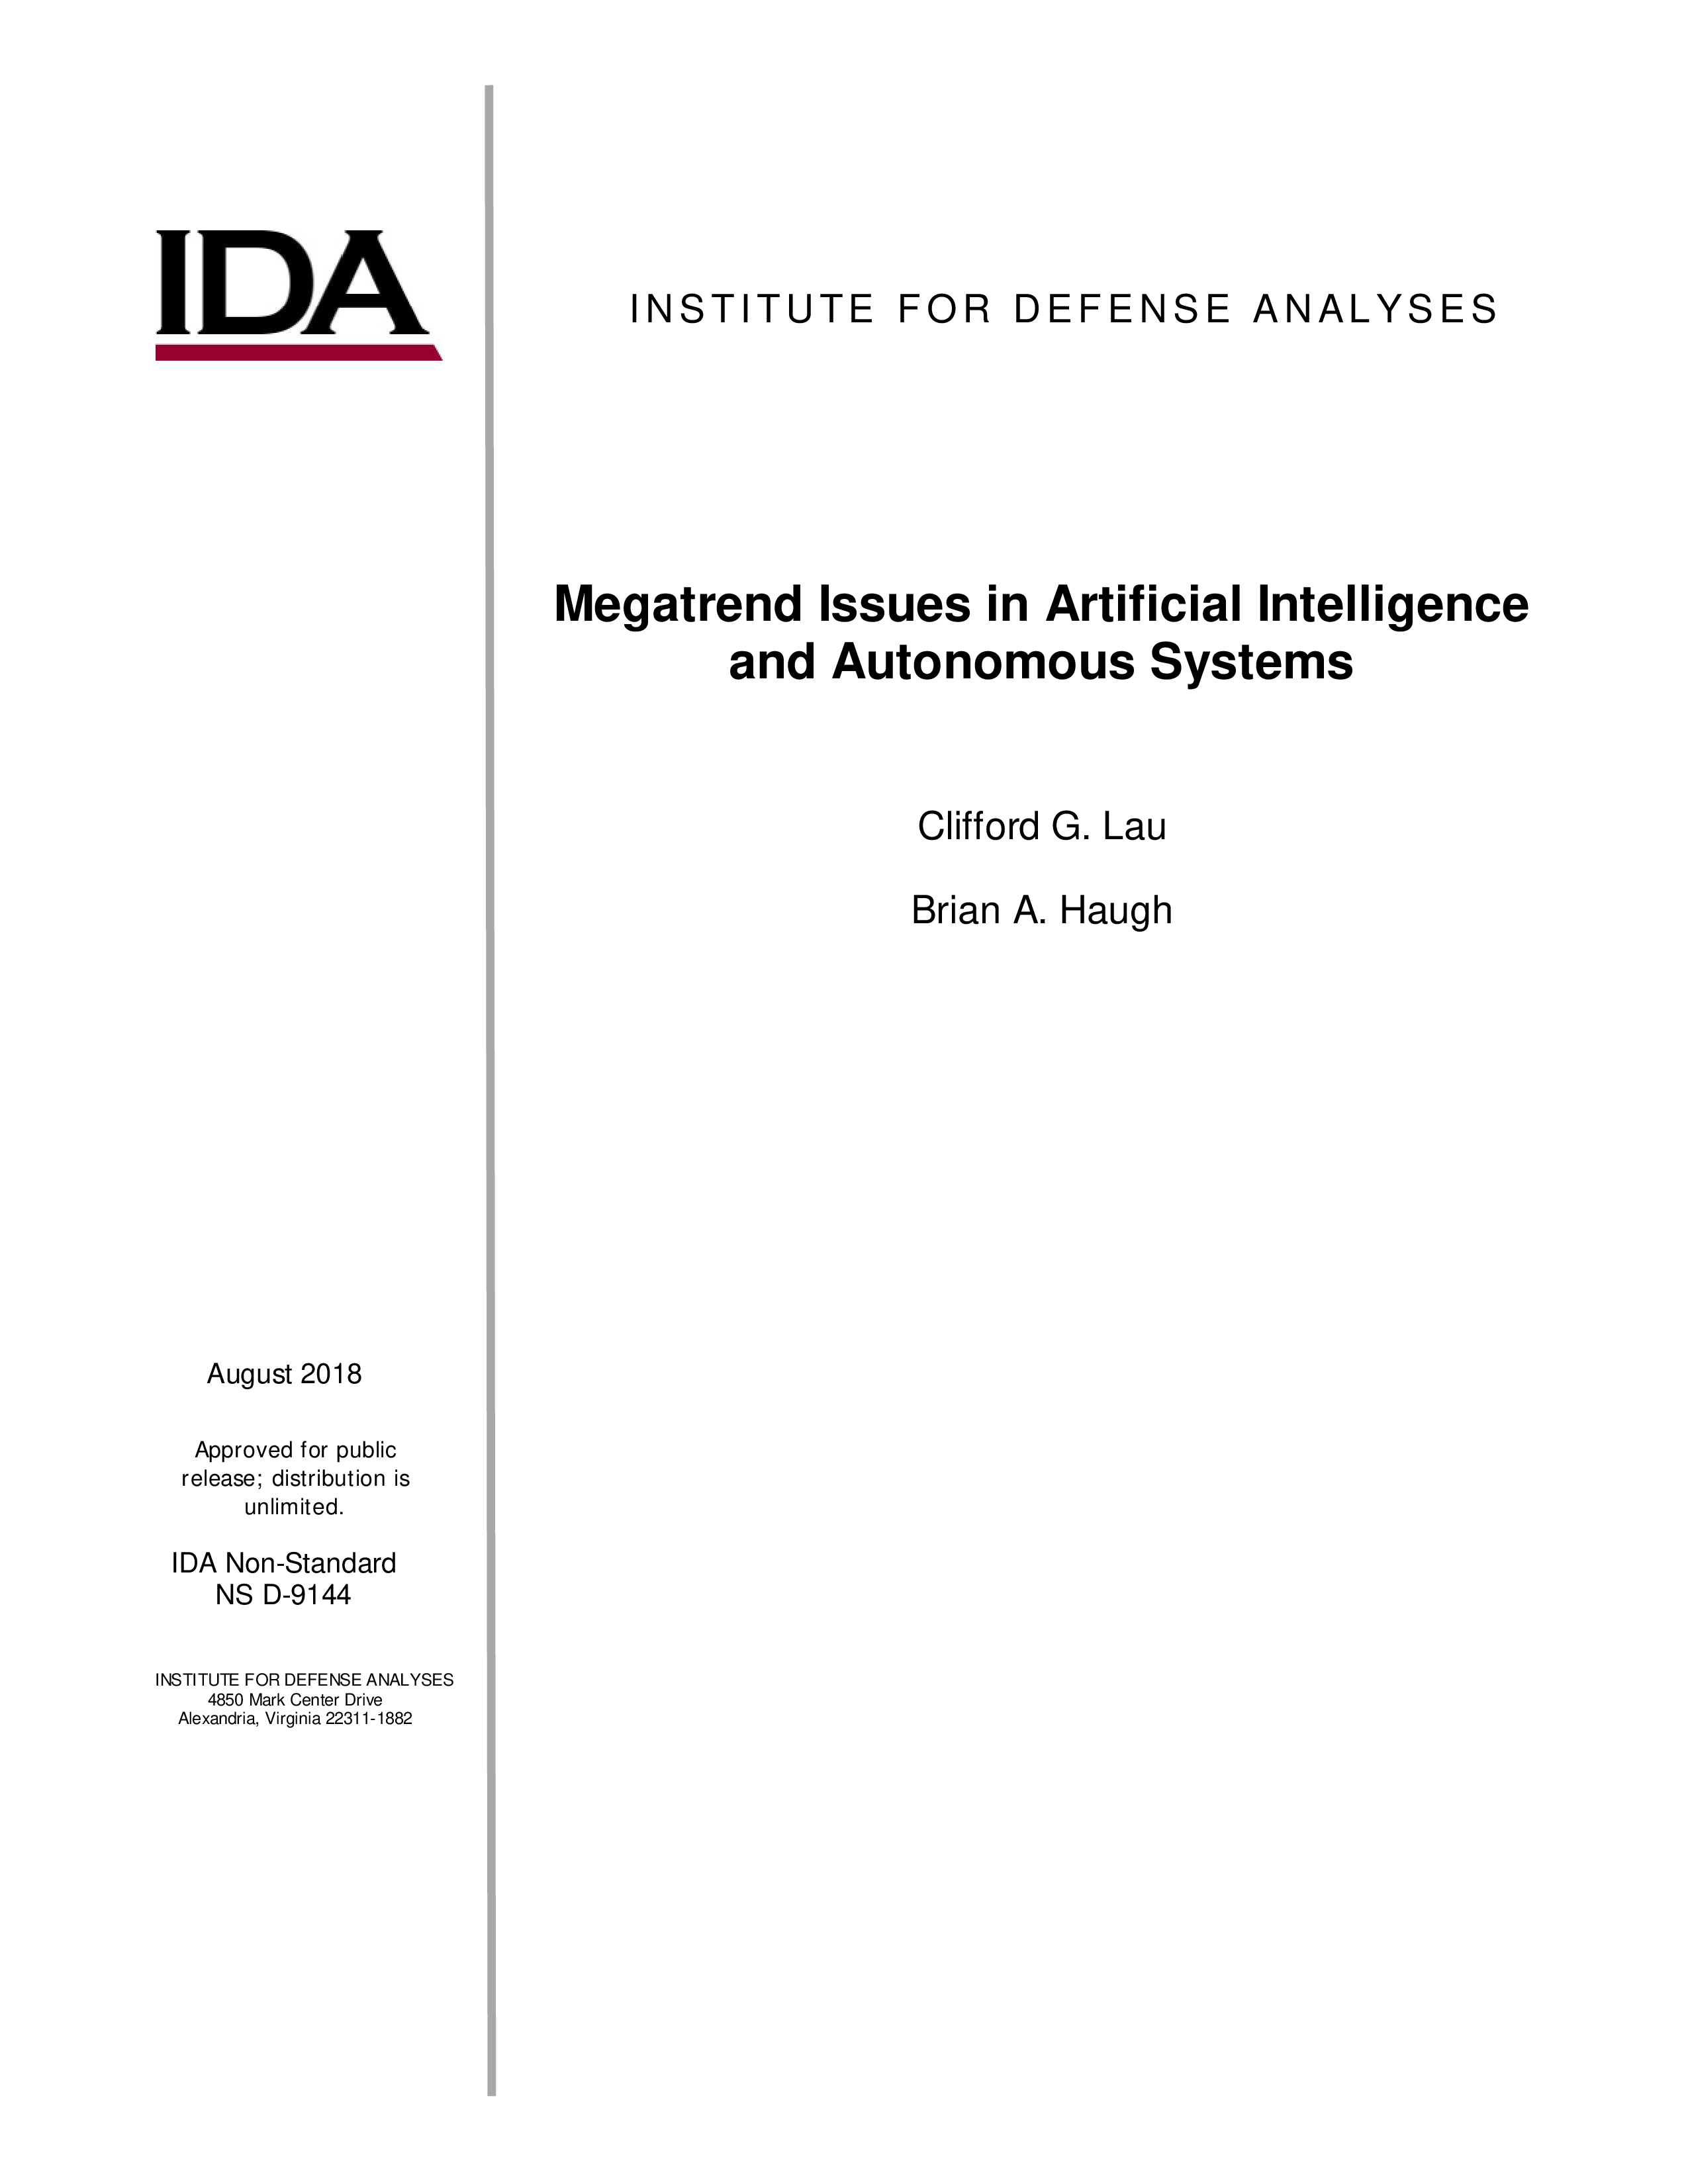 Megatrend Issues in Artificial Intelligence and Autonomous Systems